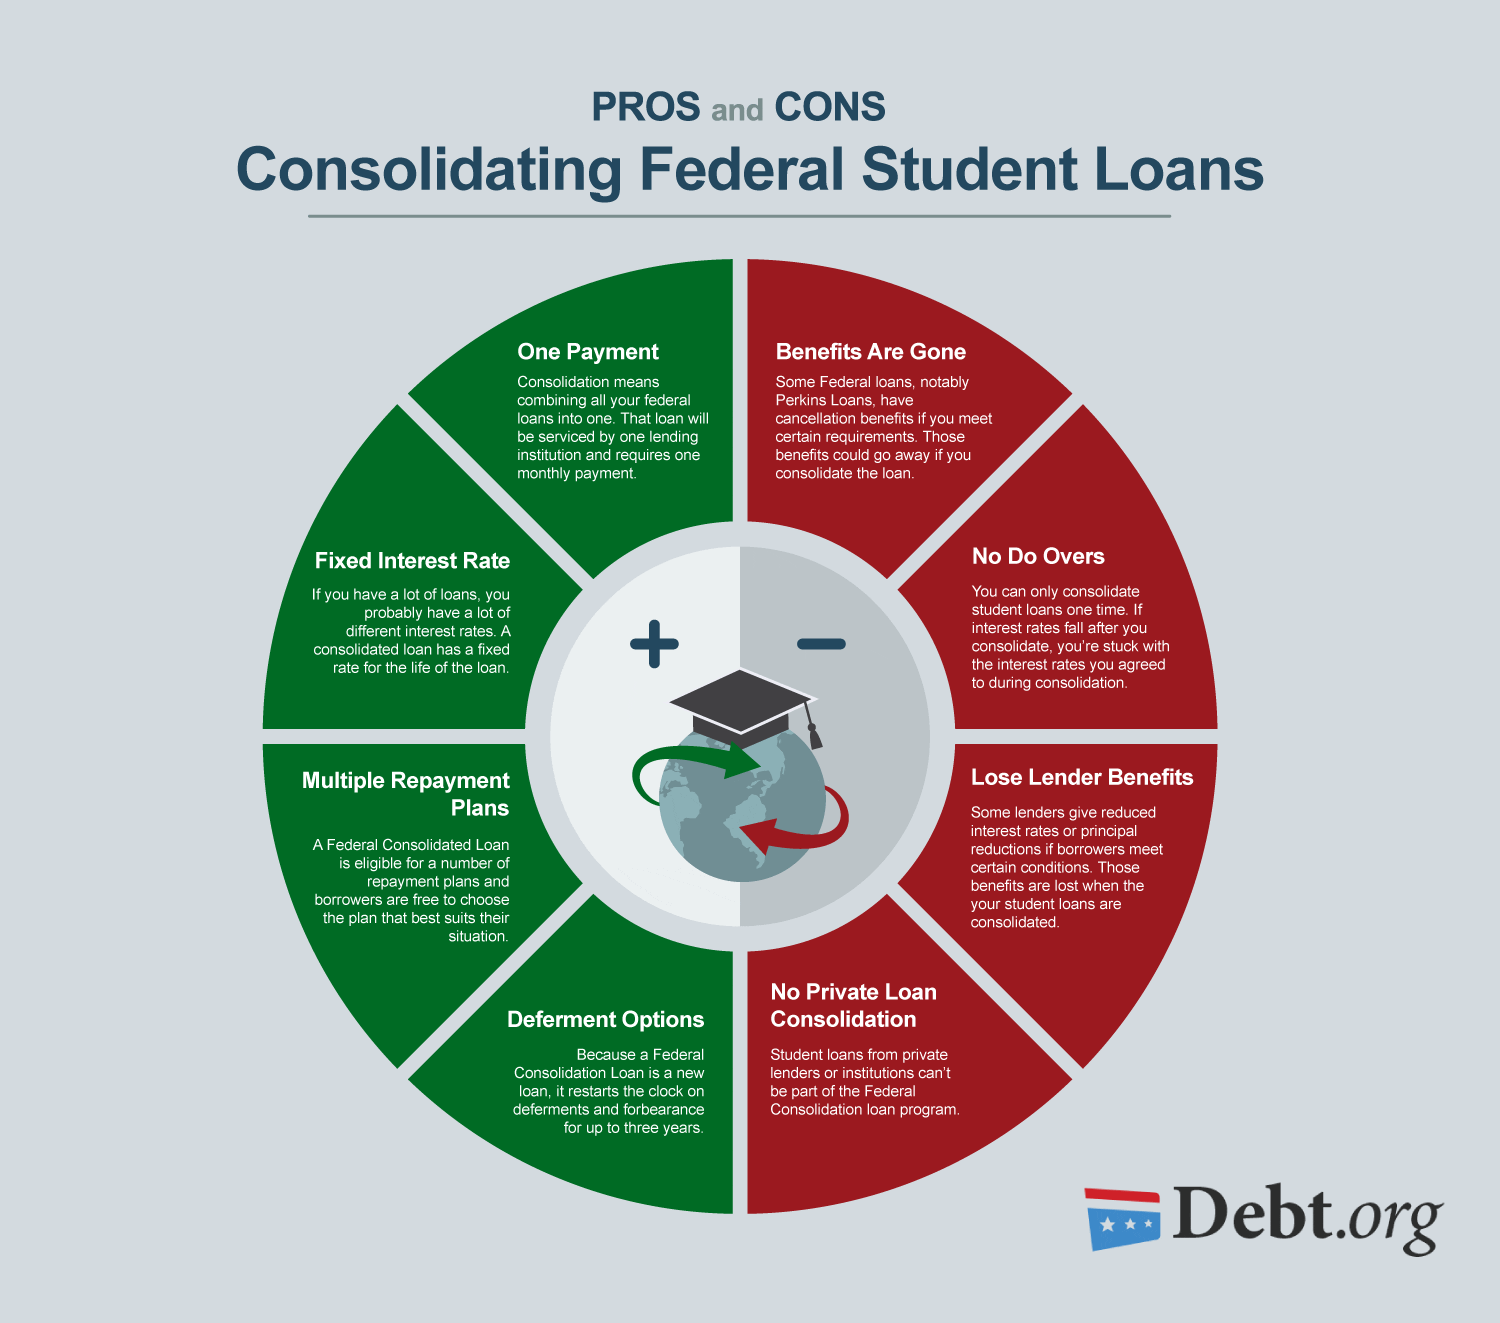 Paying Student Loan Debt: Modification & Repayment Options